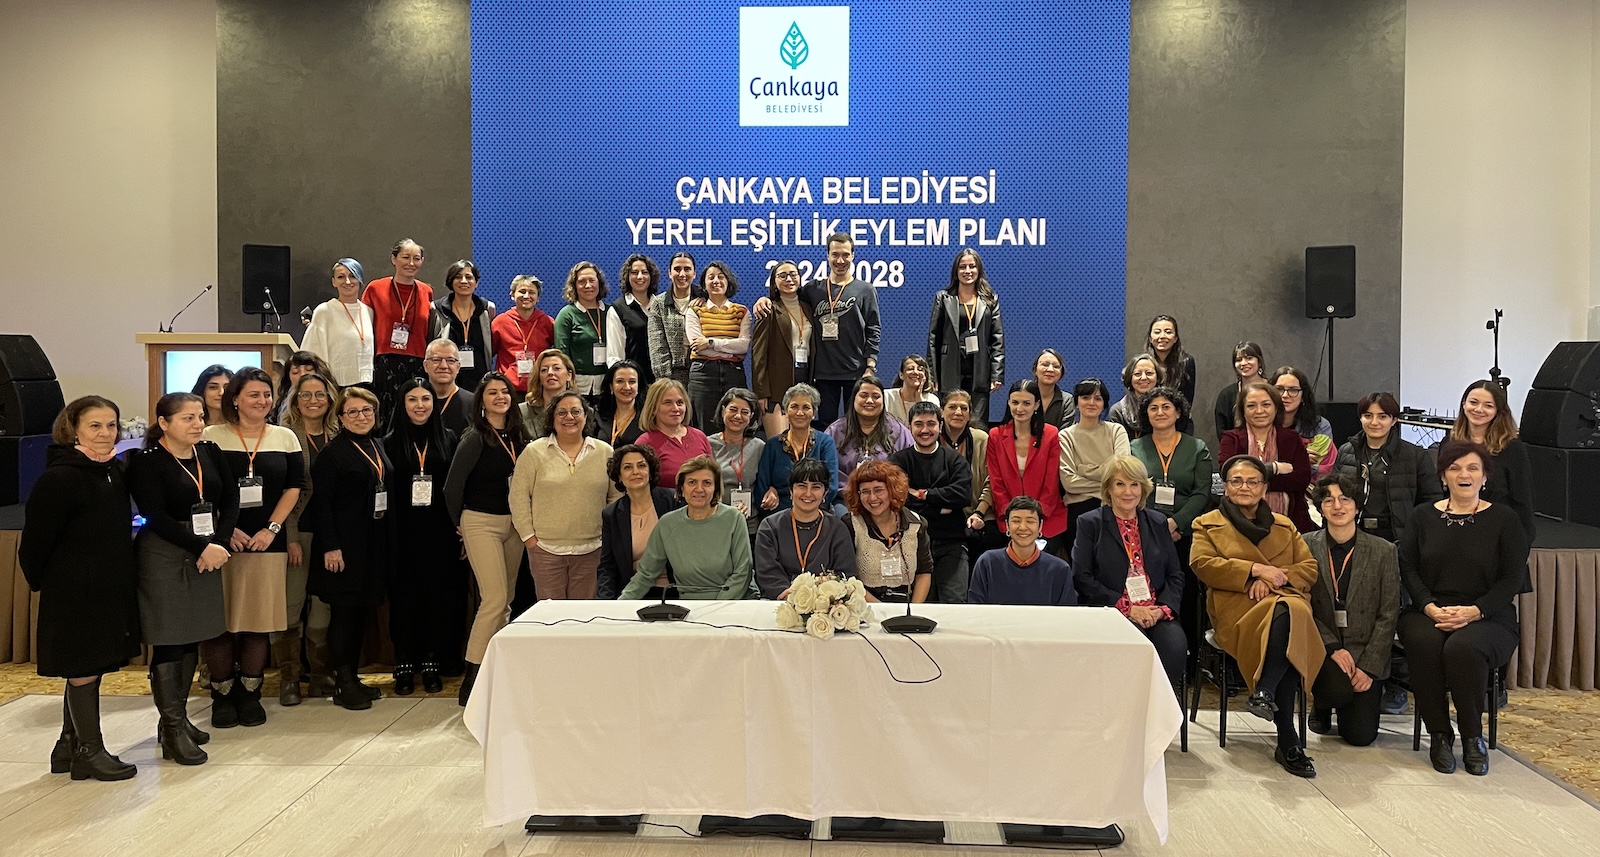 Civil society organizations join forces with Çankaya Municipality for Local Equality Action Plan | Kaos GL - News Portal for LGBTI+ News